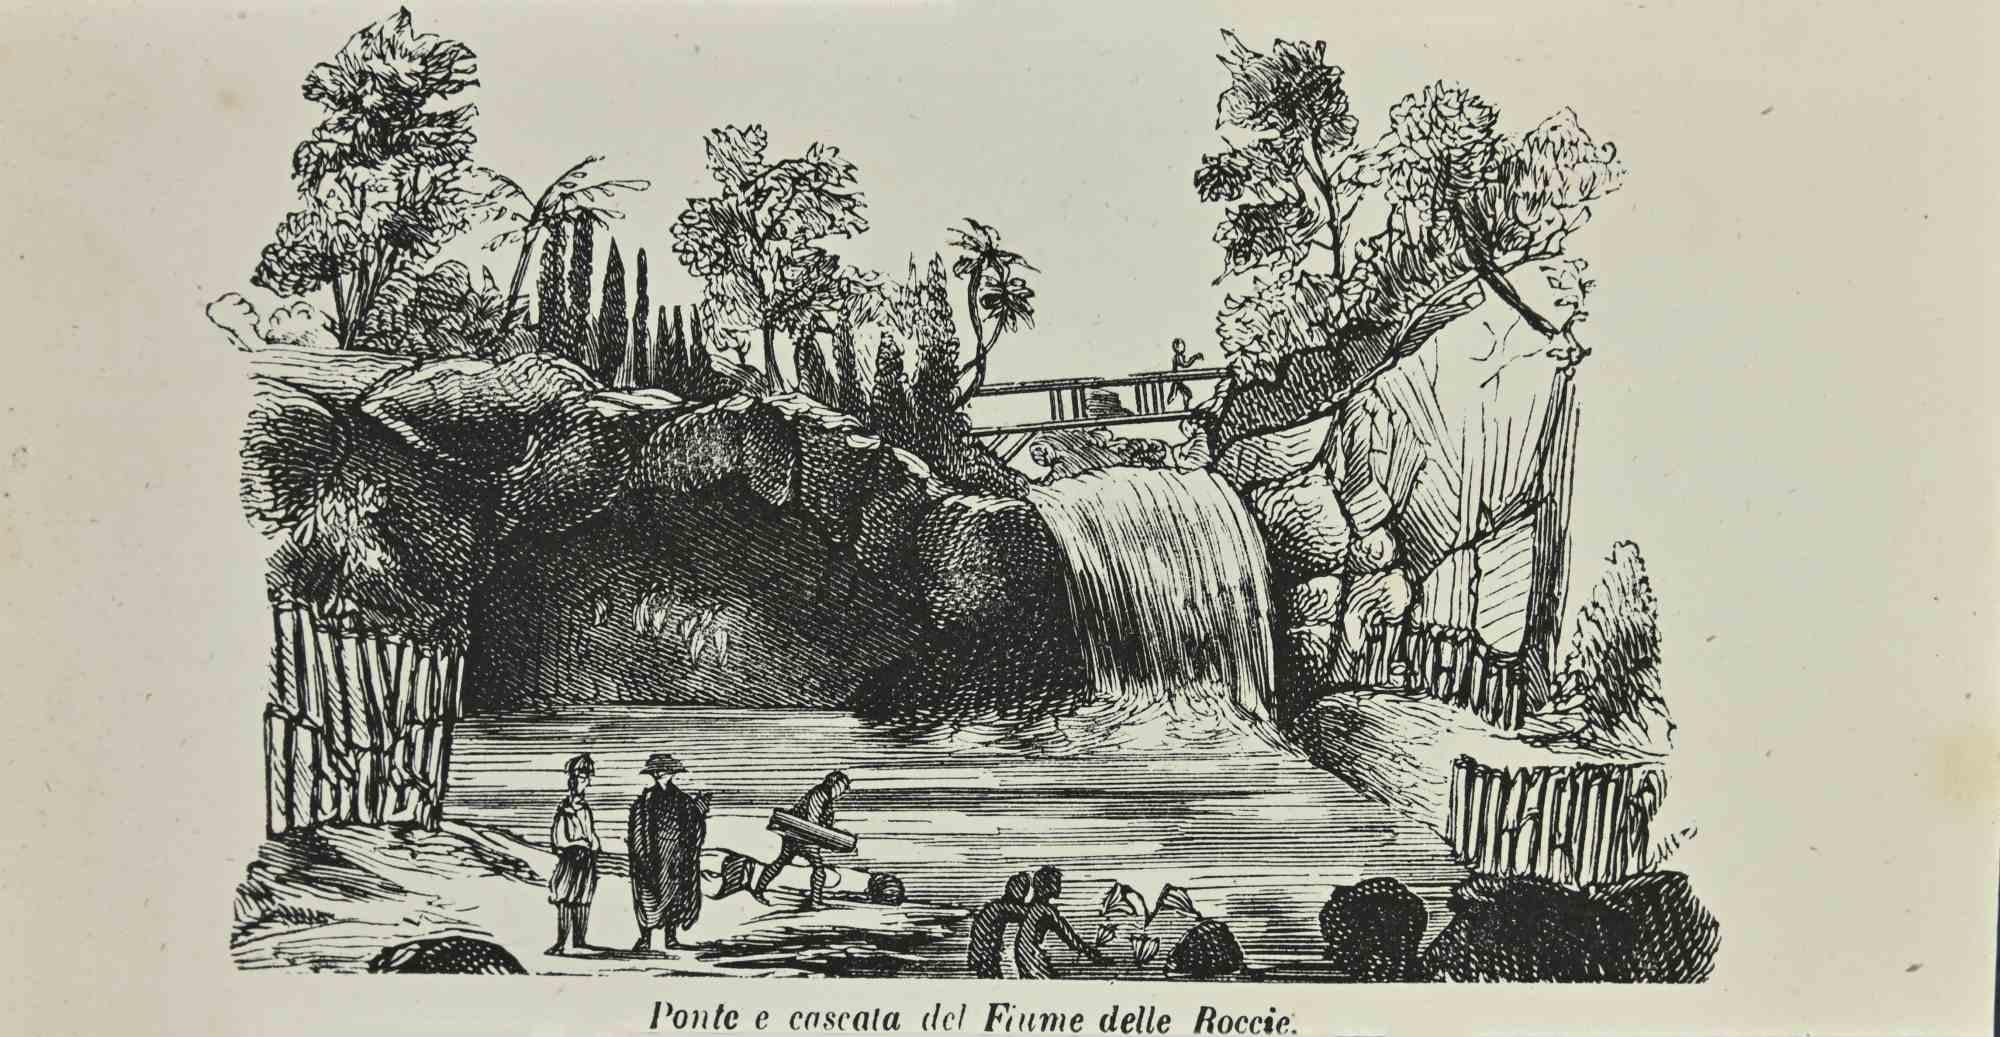 Bridge and waterfall of the River of the Rocks is a lithograph made by Auguste Wahlen in 1844.

Good condition.

At the center of the artwork is the original title "Ponte e cascata del Fiume delle Roccie".

The work is part of Suite Moeurs, usages